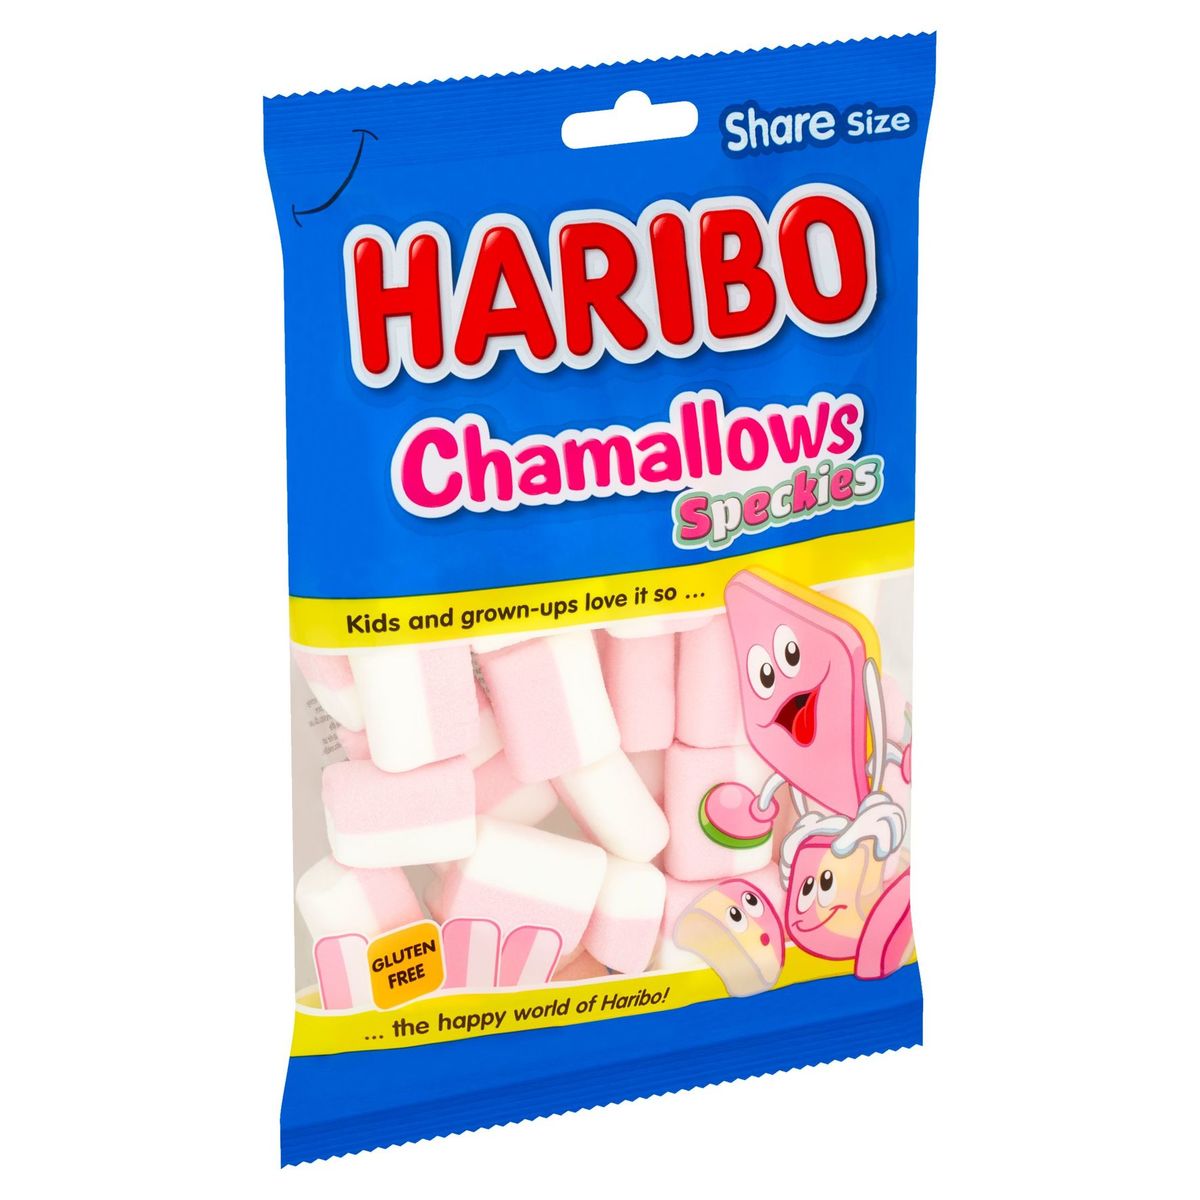 Haribo Chamallows Speckies Share Size 175 g